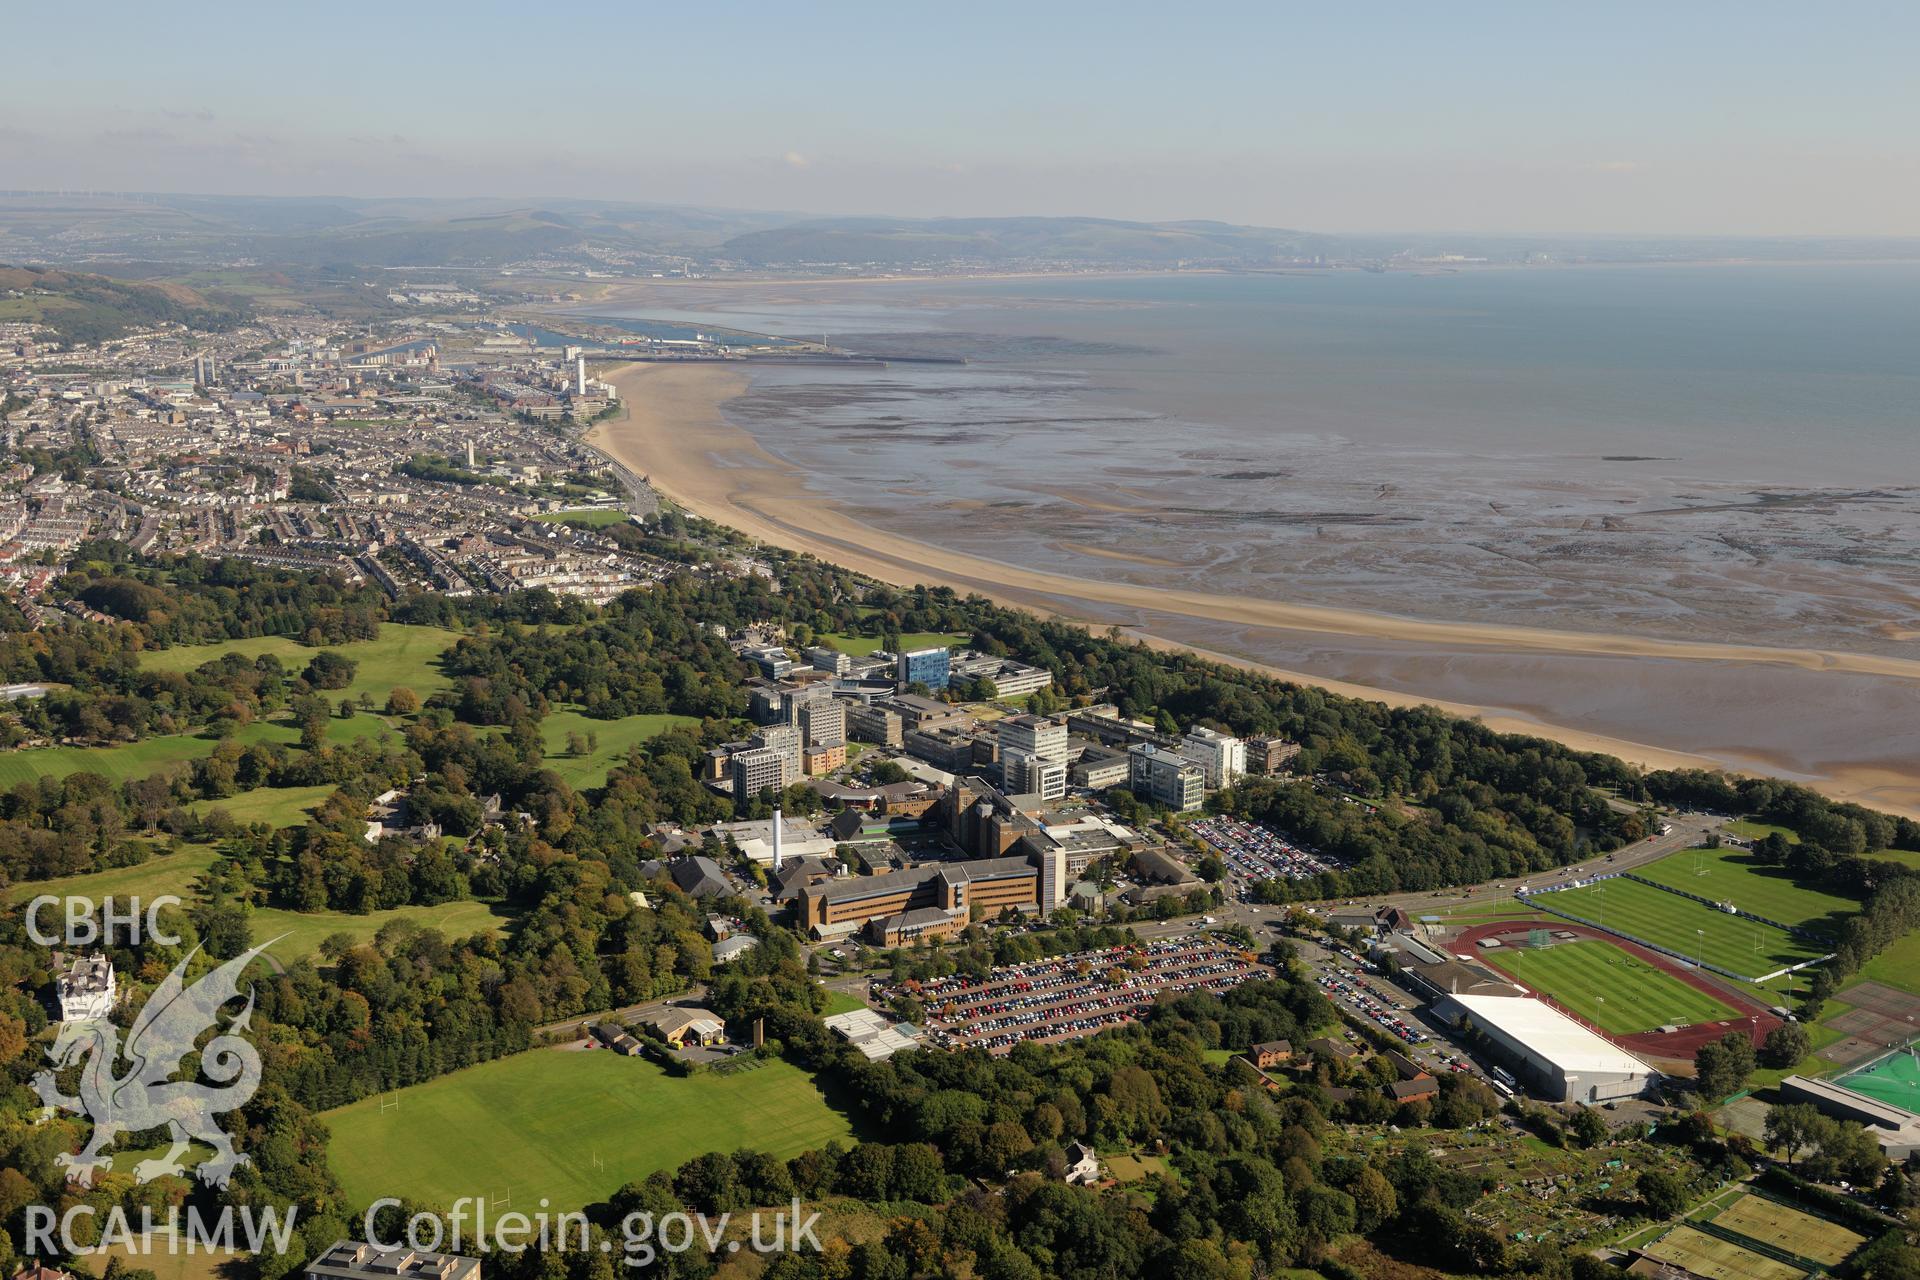 Singleton Park, Singleton Hospital, Swansea University and King George V field, Swansea. Oblique aerial photograph taken during the Royal Commission's programme of archaeological aerial reconnaissance by Toby Driver on 30th September 2015.